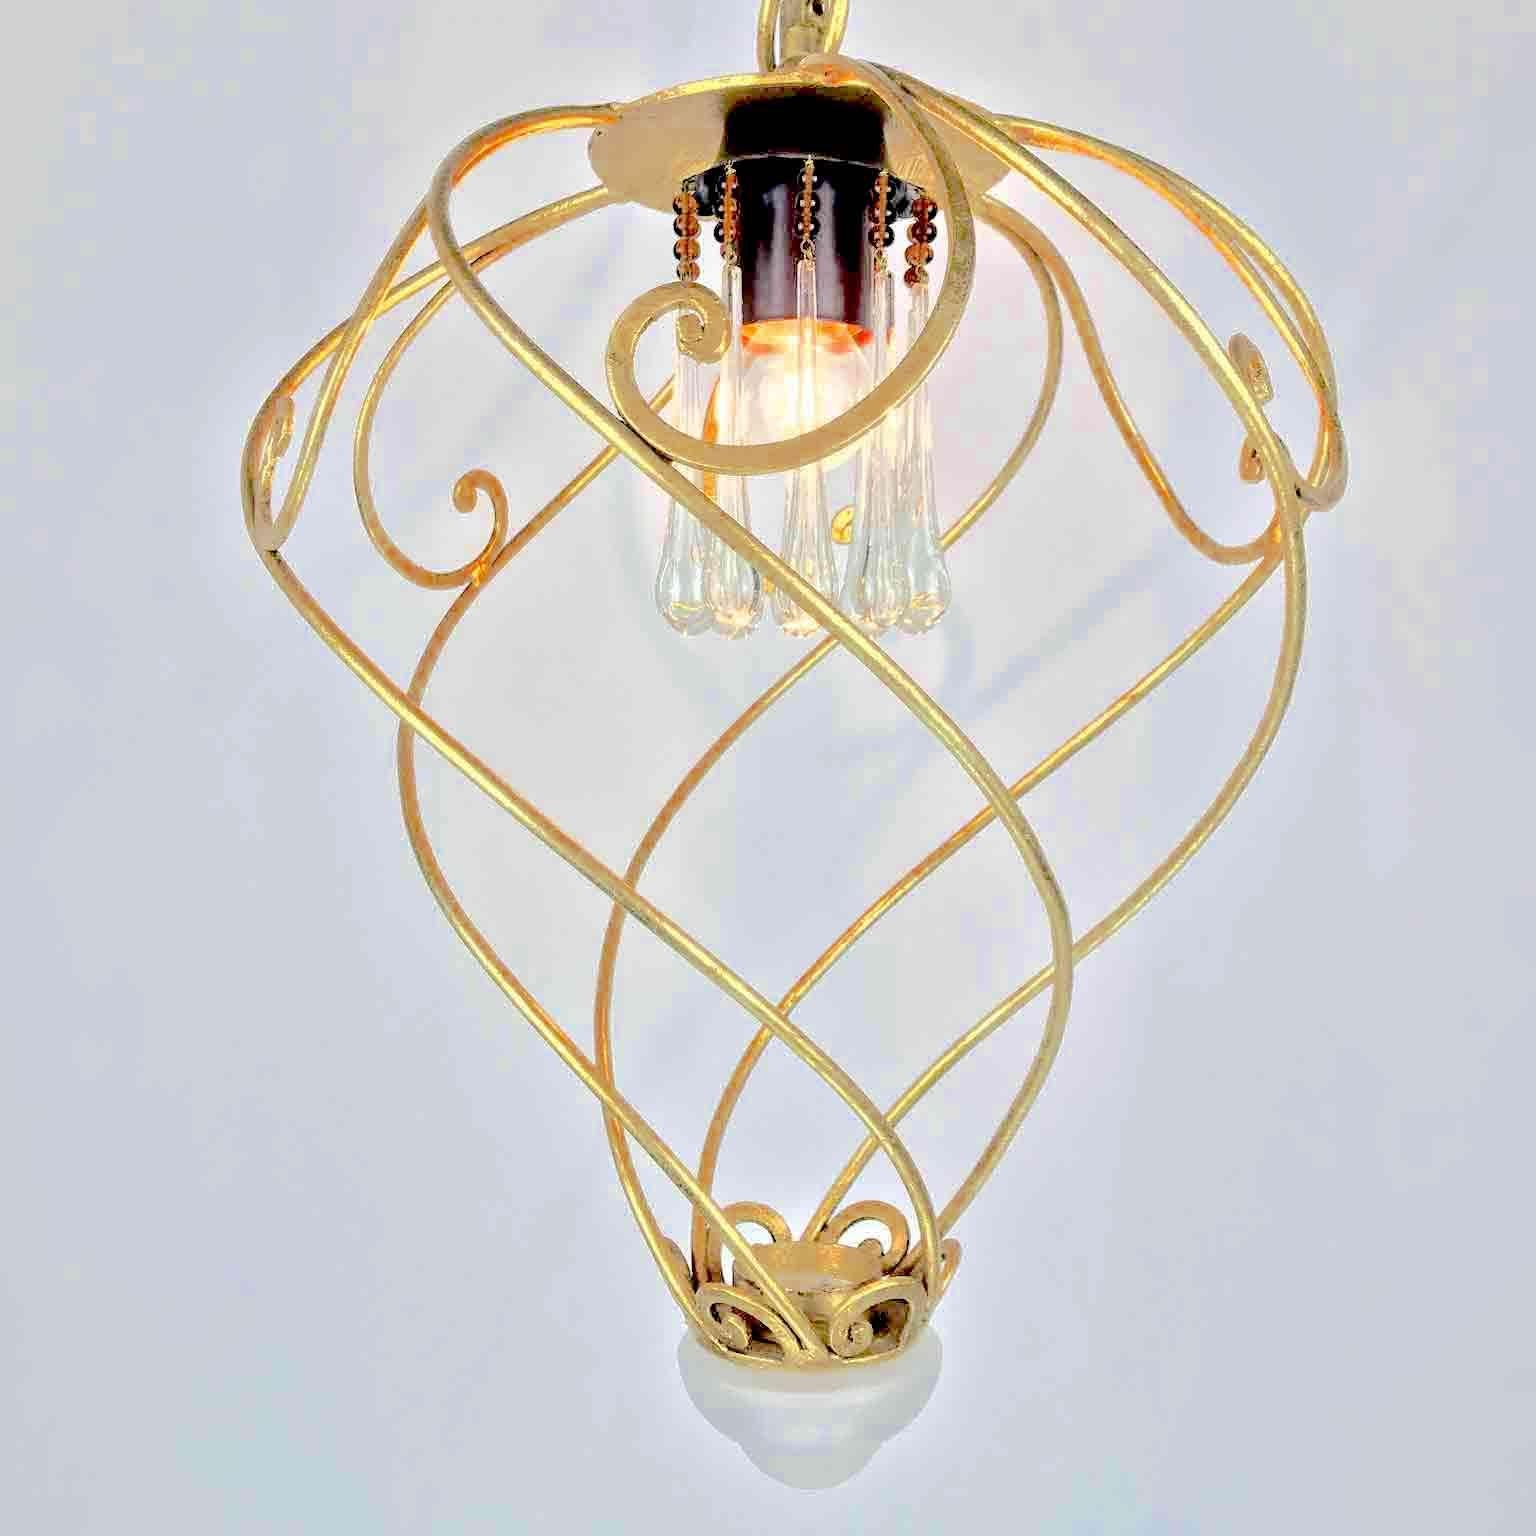 Frosted Italian Spiral Shaped Chandelier by Banci Firenze Leaf Gilded Cage 1980s